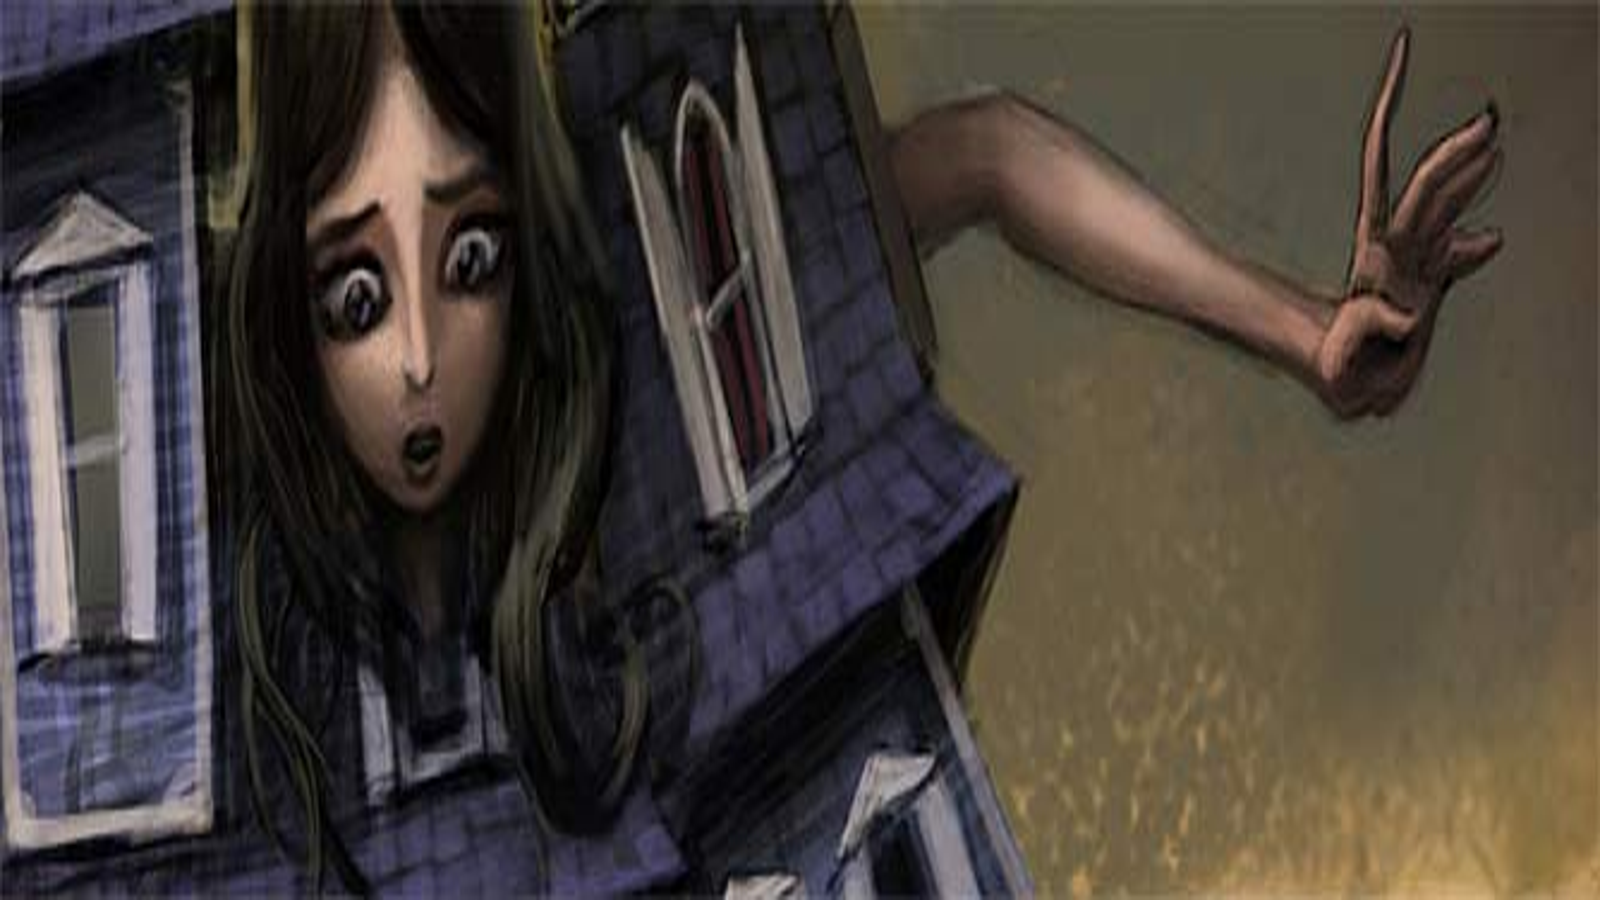 Alice: Madness Returns sequel Alice: Asylum rejected by EA